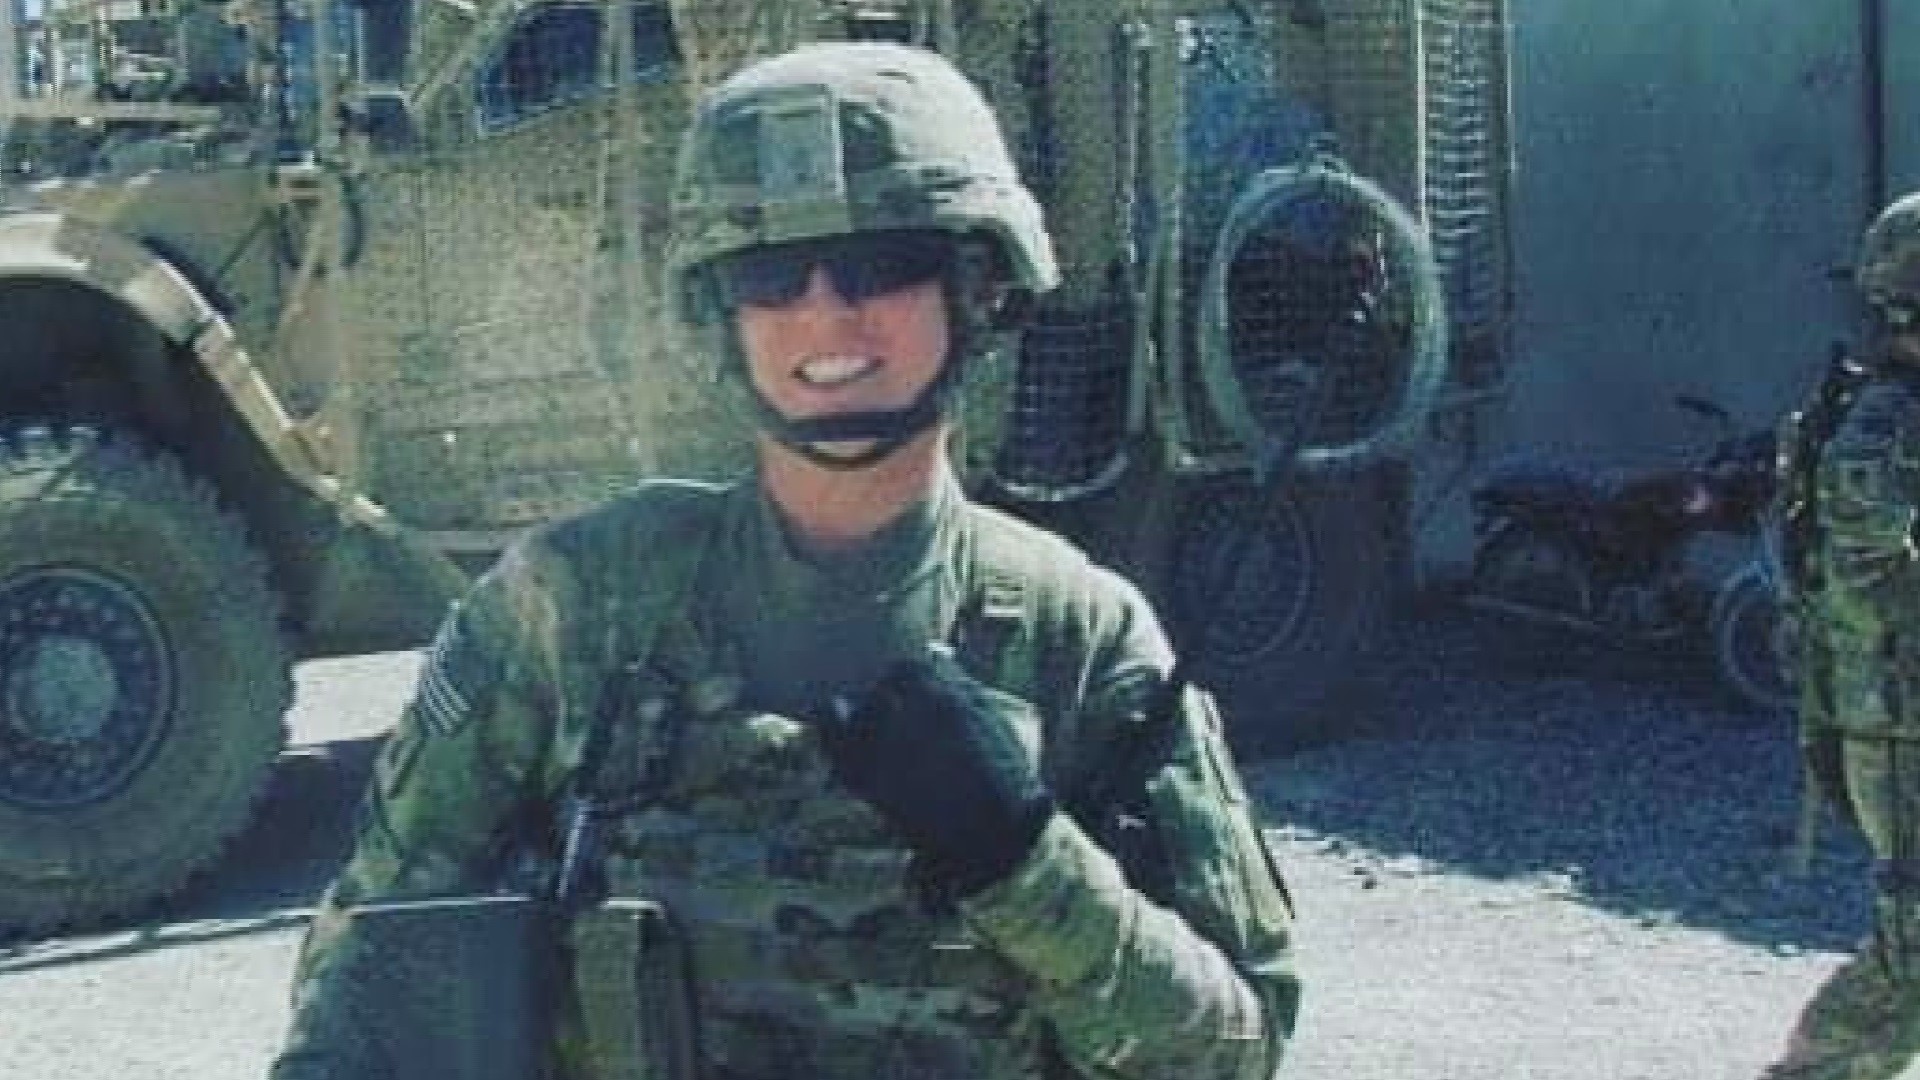 Jayni Whitefield served in the US Army over 14 years and continues her service as a reservist.